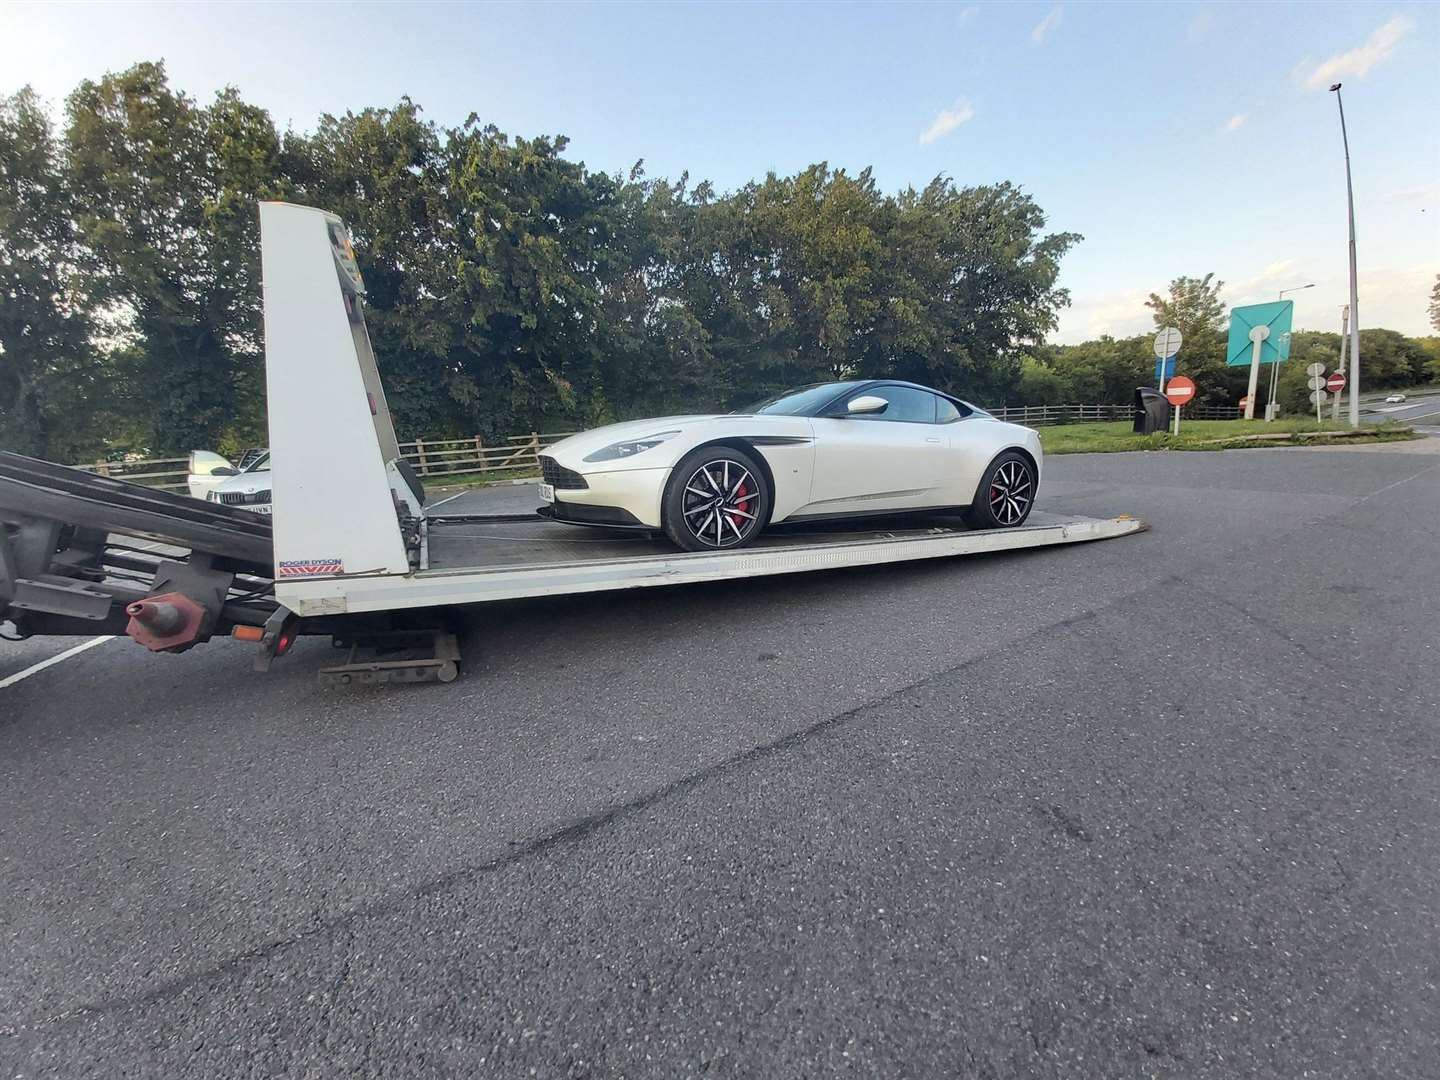 The Aston Martin was confiscated by police